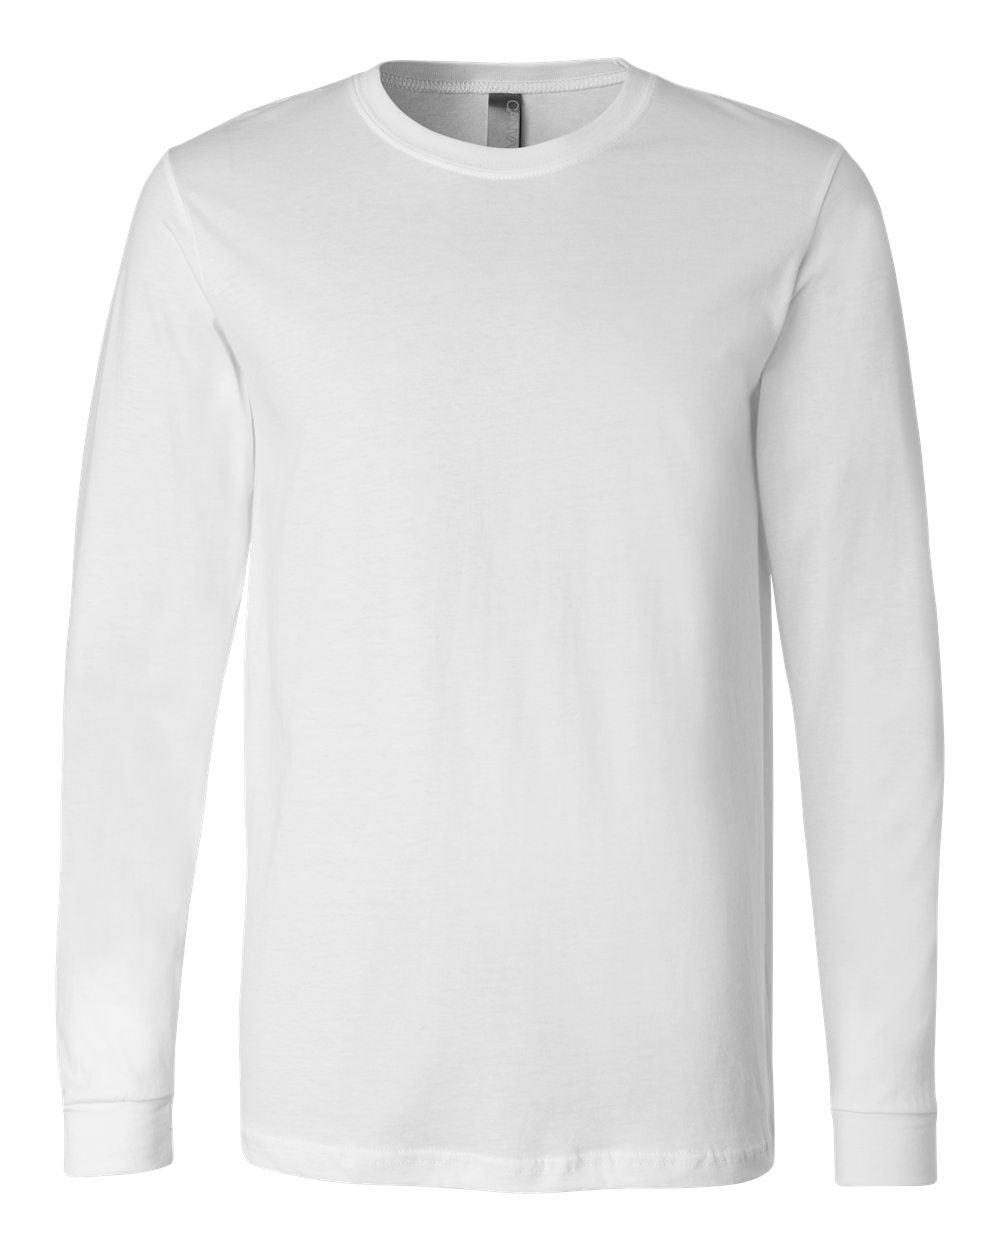 Bella + Canvas Long Sleeve (3501) in White